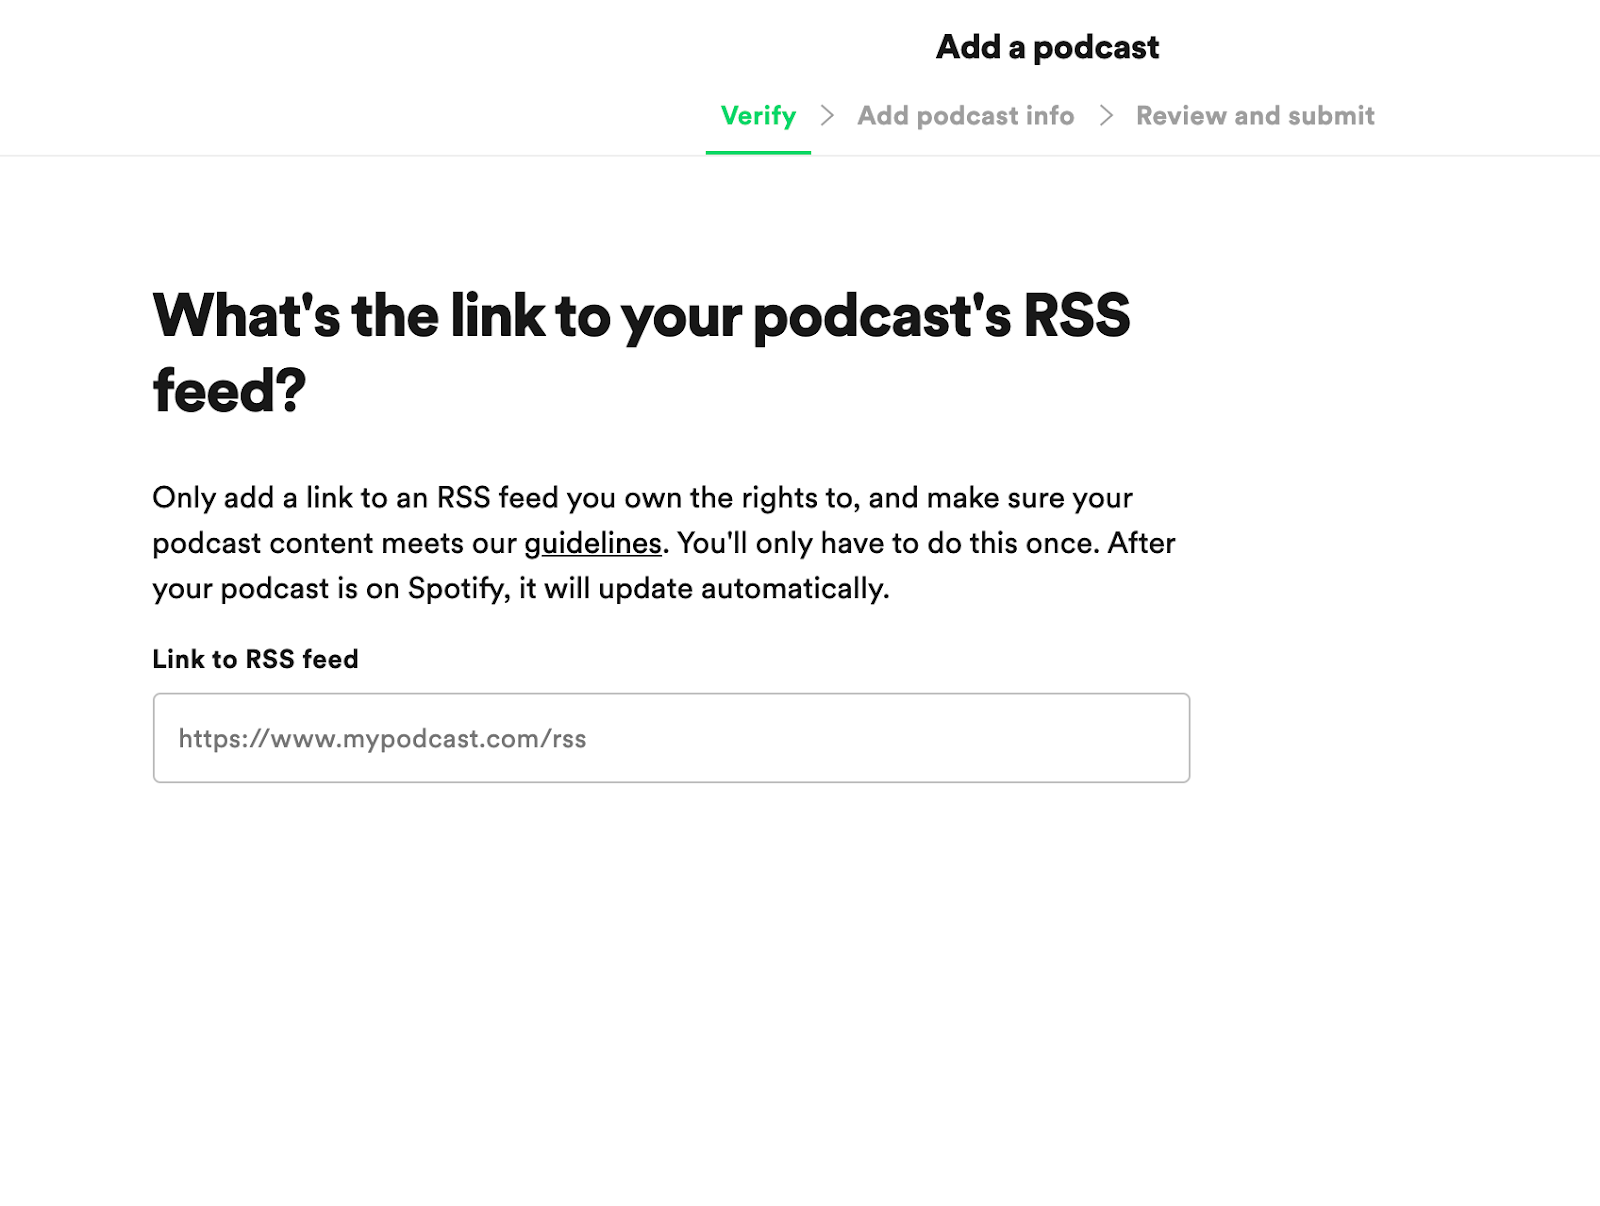 what's the link to your podcast's rss FEED?